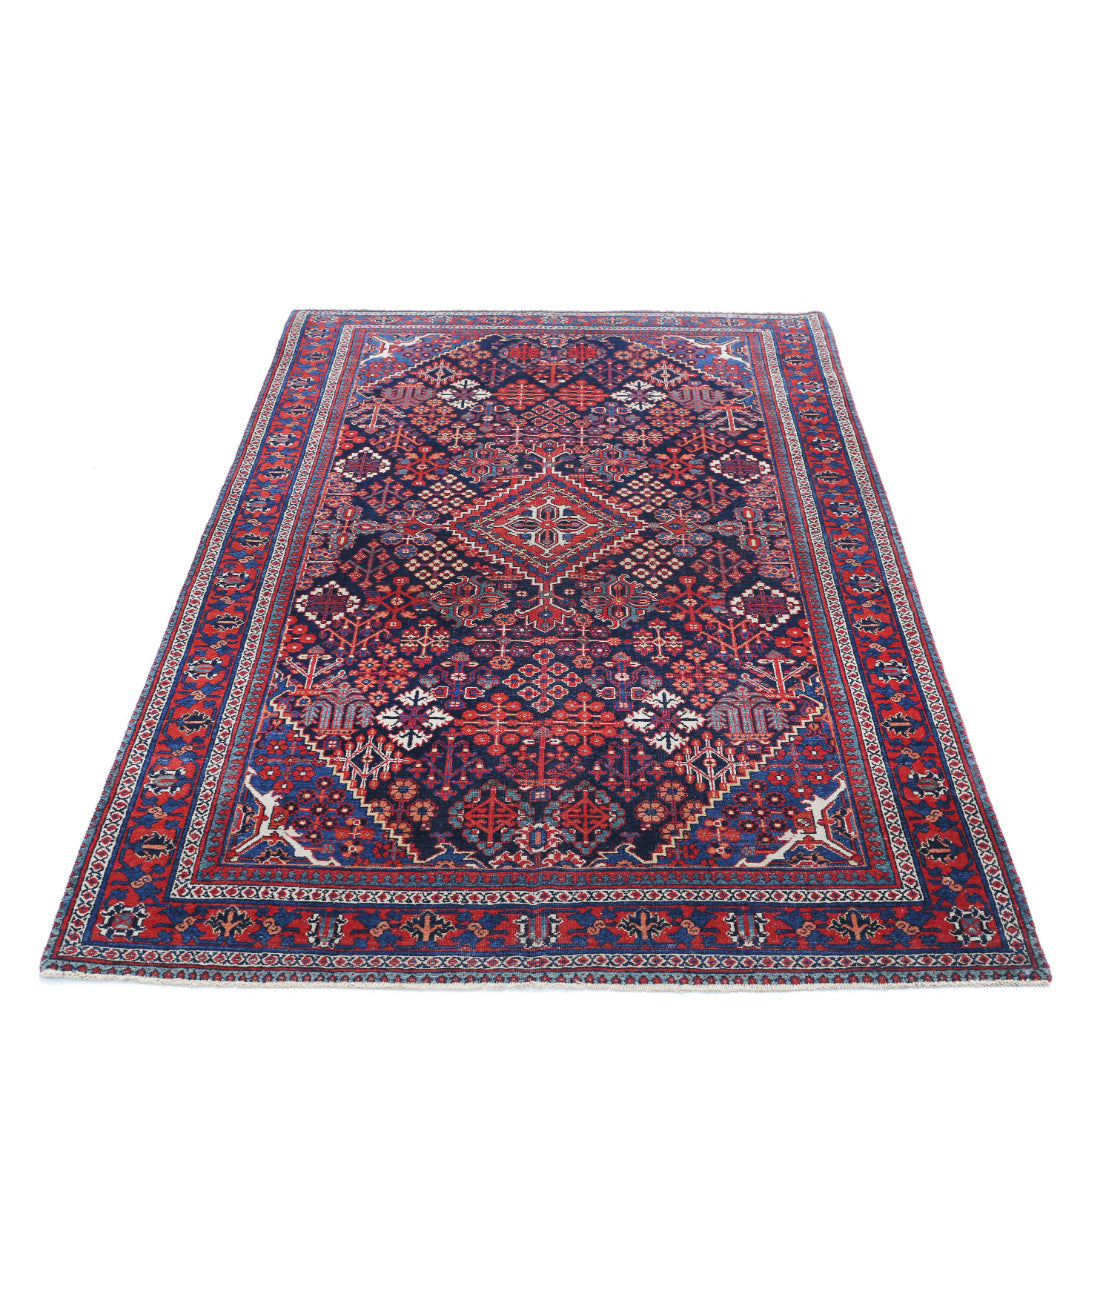 Hand Knotted Persian Josheghan Wool Rug - 4'5'' x 6'8'' 4'5'' x 6'8'' (133 X 200) / Blue / Red